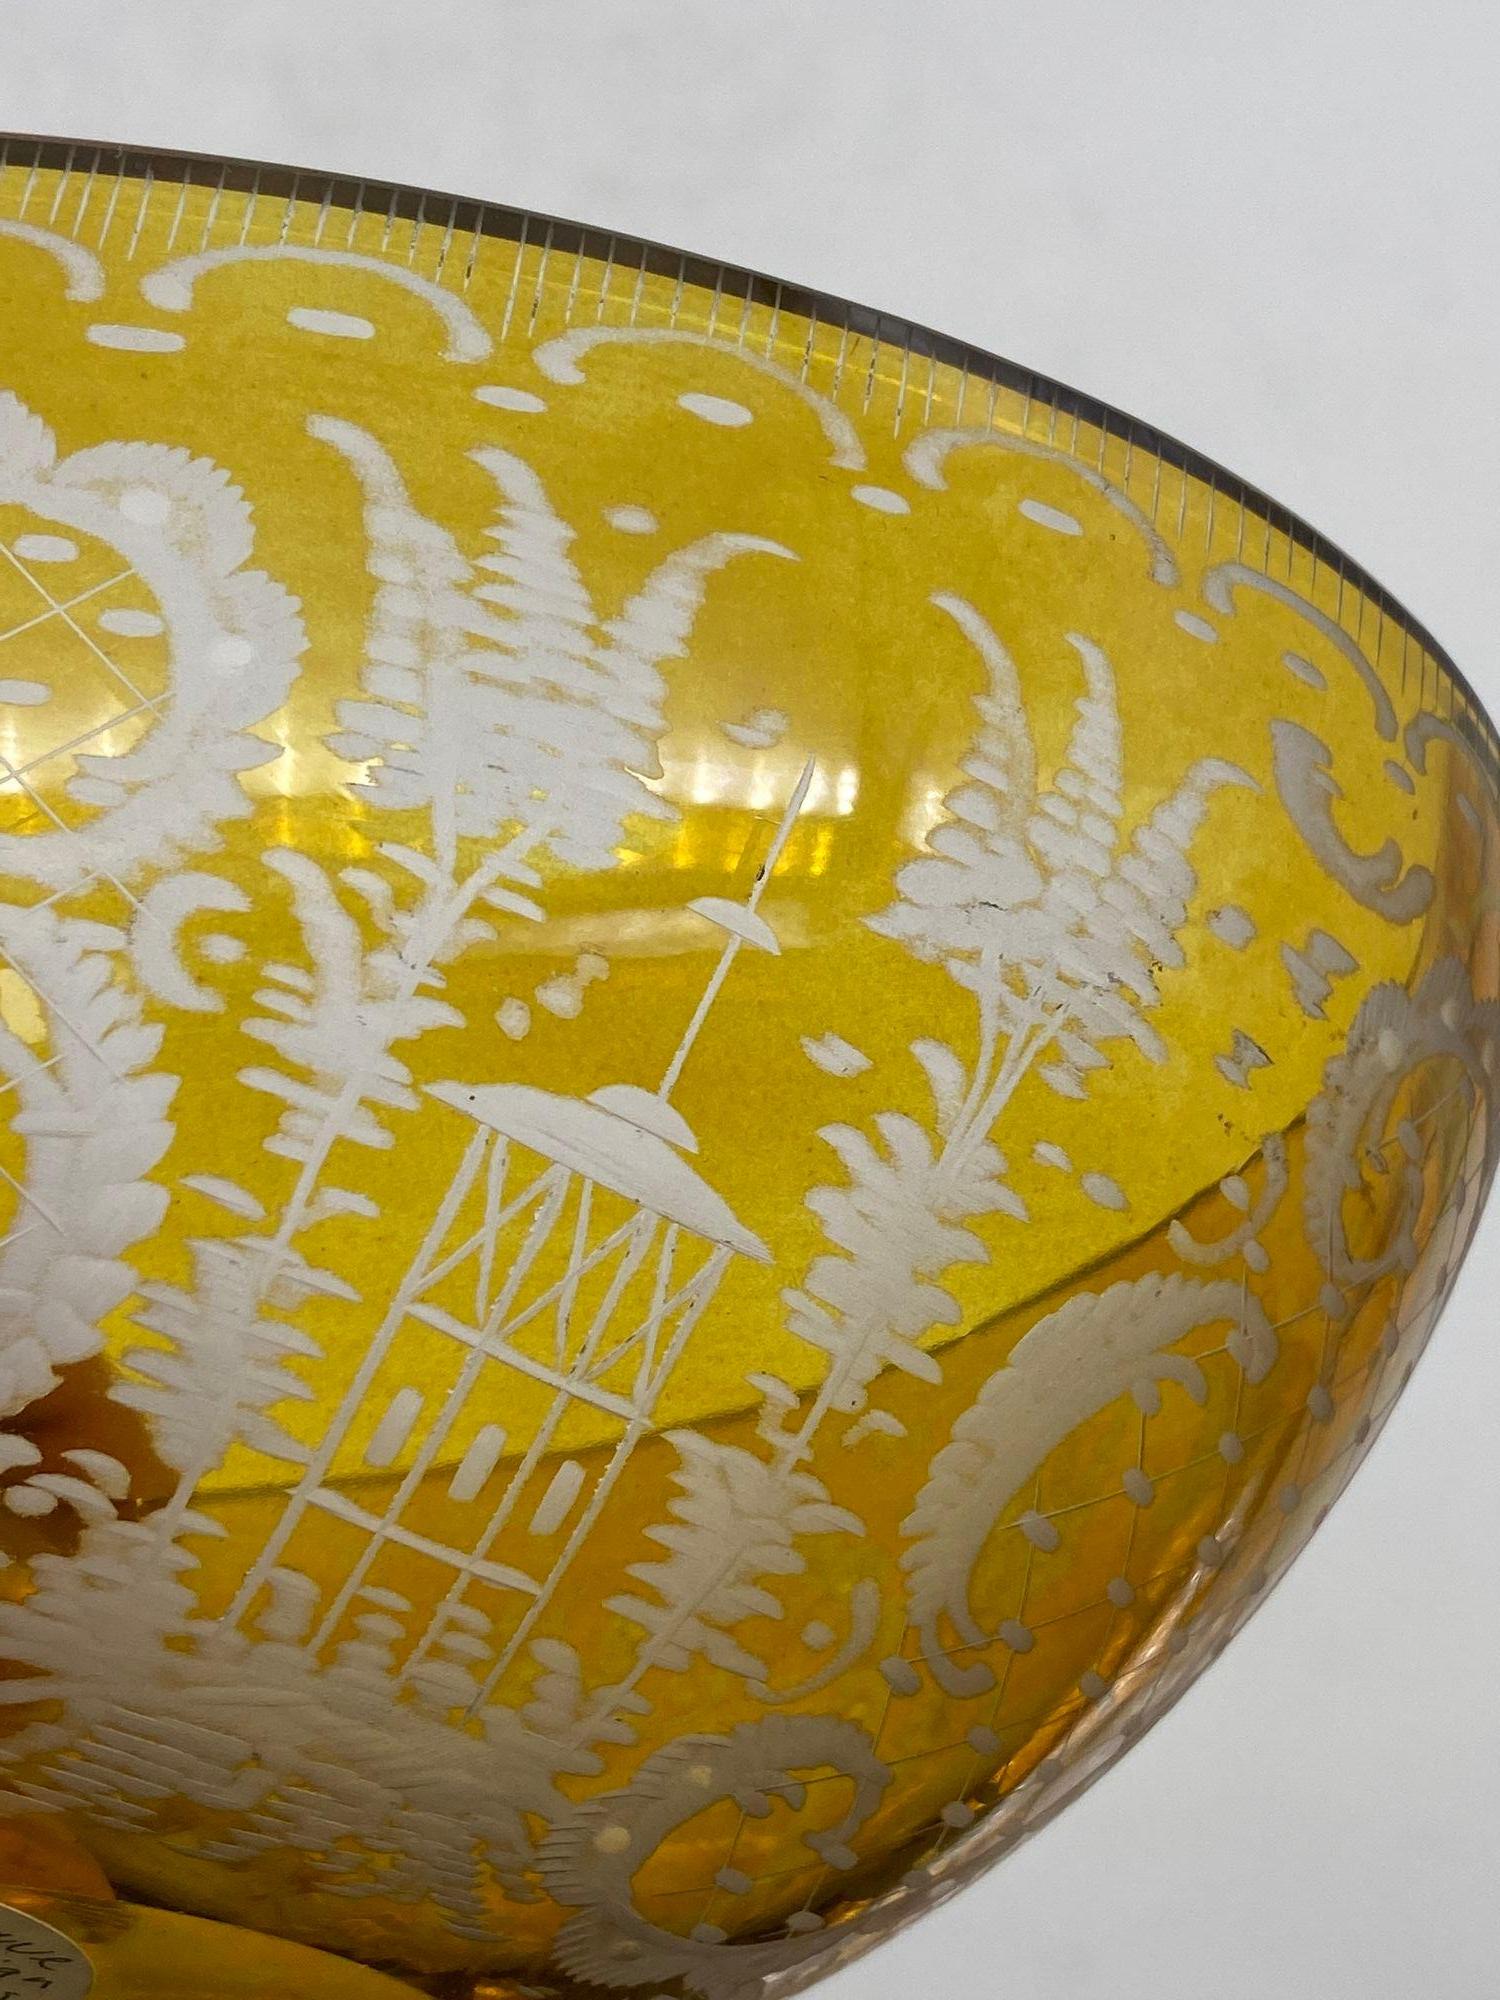 Bohemian Amber-Flashed Glass Bowl Flared Form, Circa 1900 For Sale 6